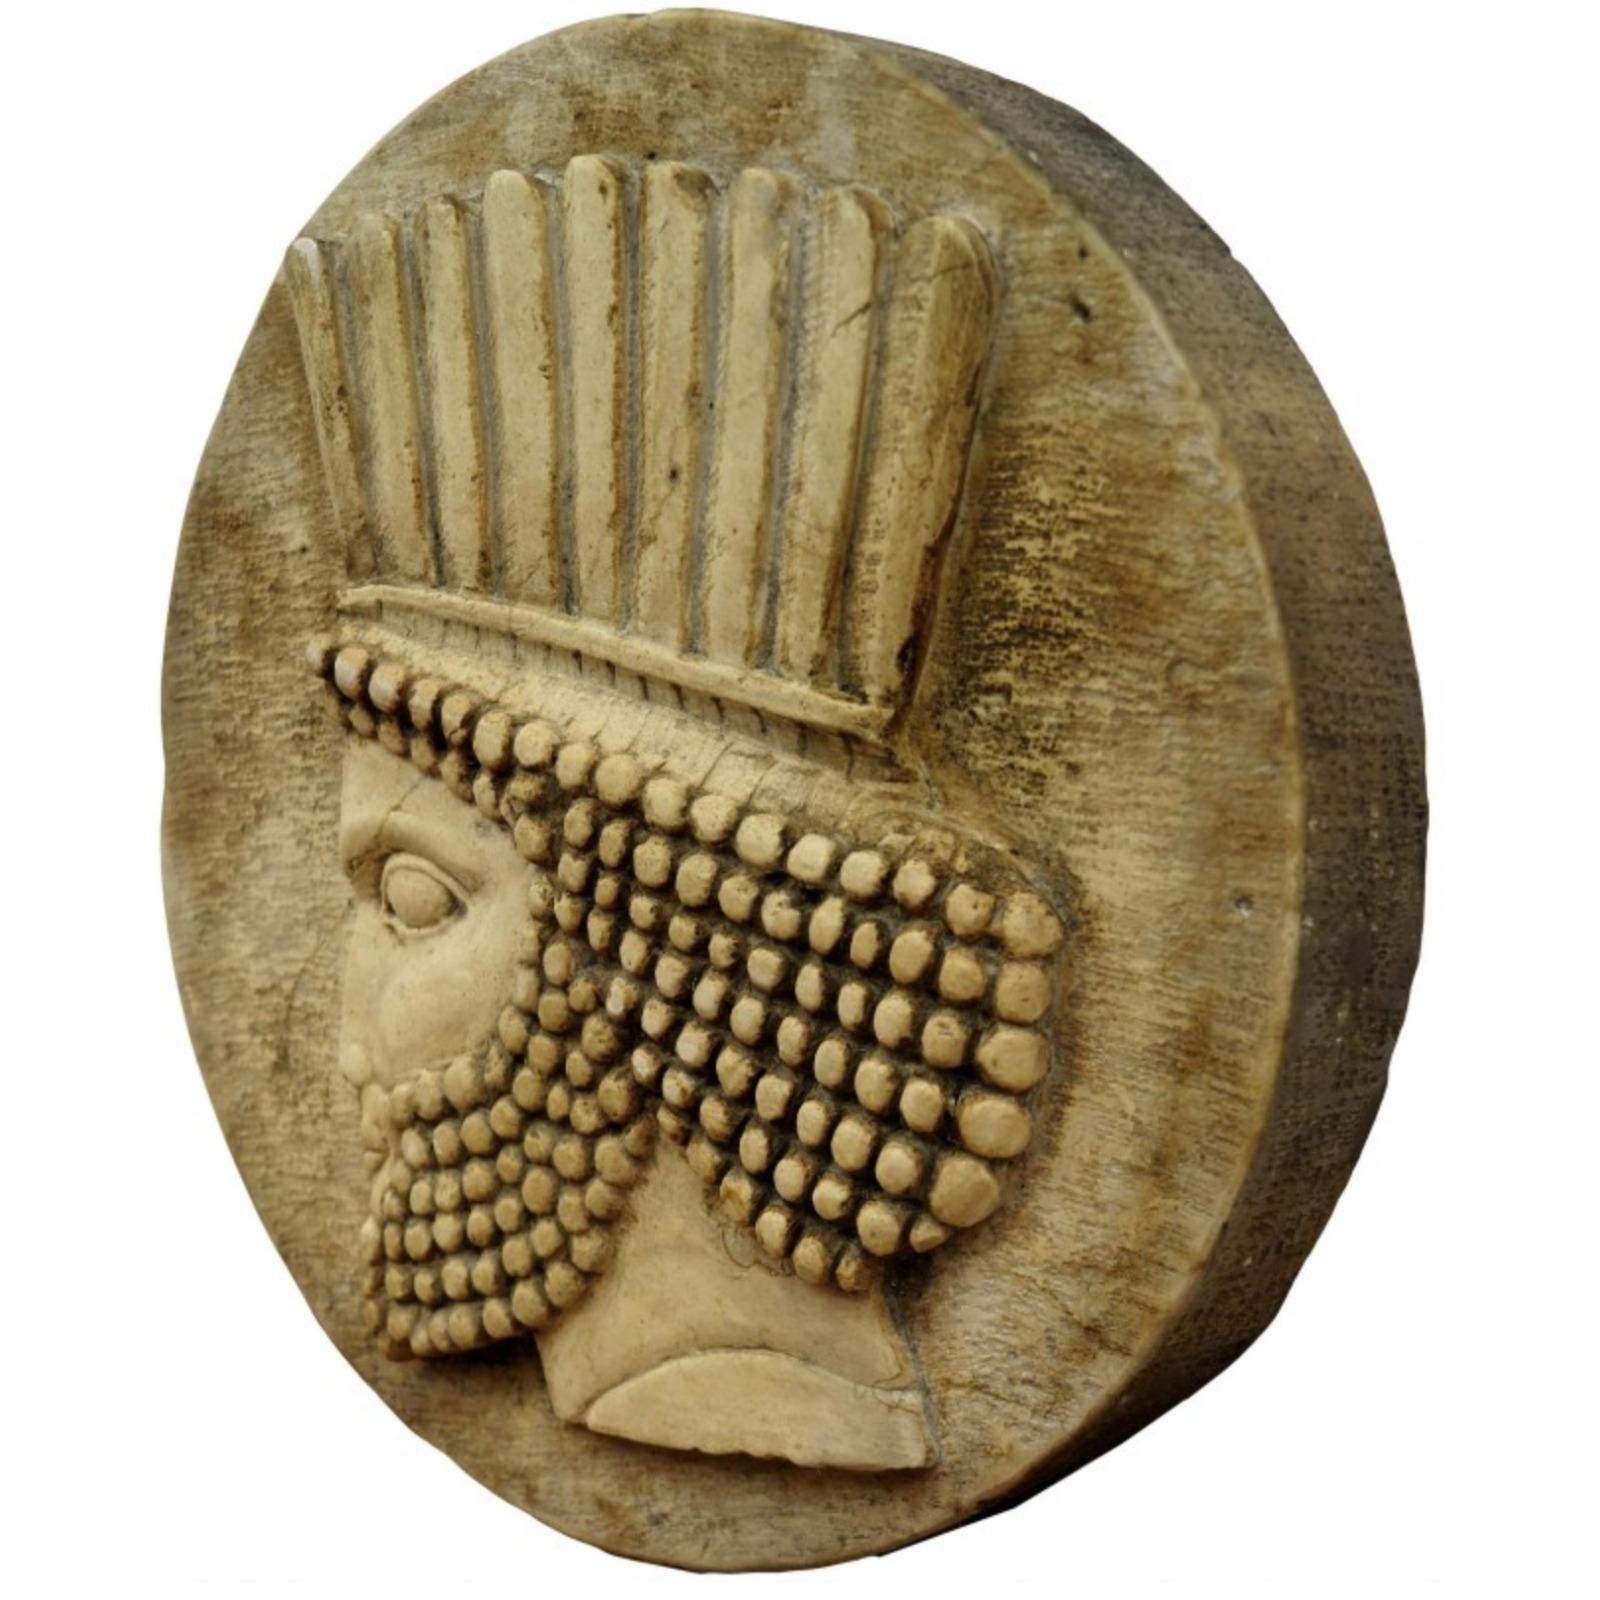 ROUND BAS-RELIEF OF PERSEPOLI PERSIA IN STONE late 19th Century
This roundel is part of a series of roundels inspired by wonderful ancient Greek coins.
Freely reproduced from a Thracian coin, Lysimachus, stater, mint uncertain, 306-305 BC.